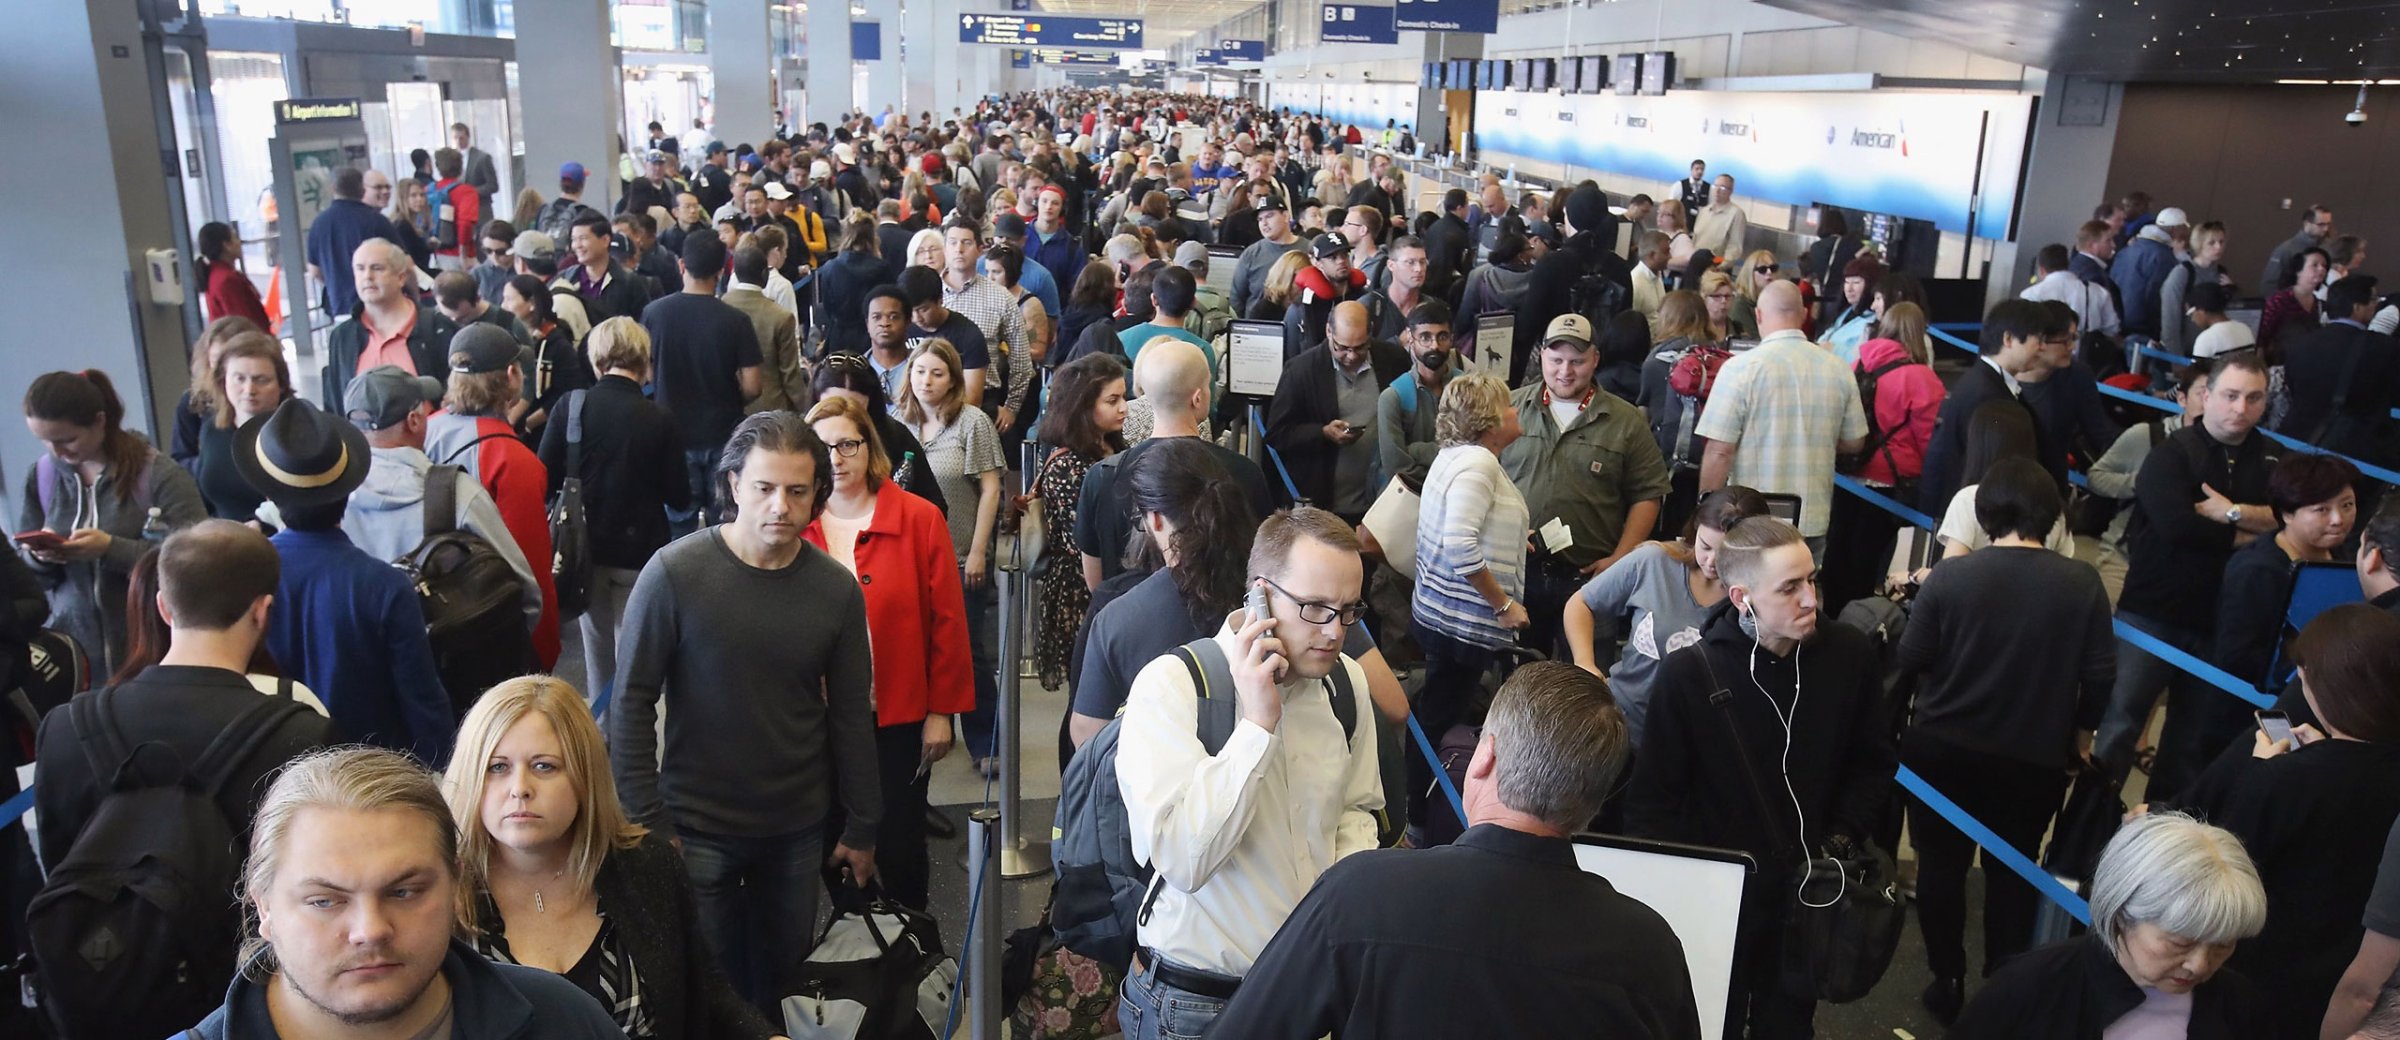 A security line at Chicago’s O’Hare airport on May 16